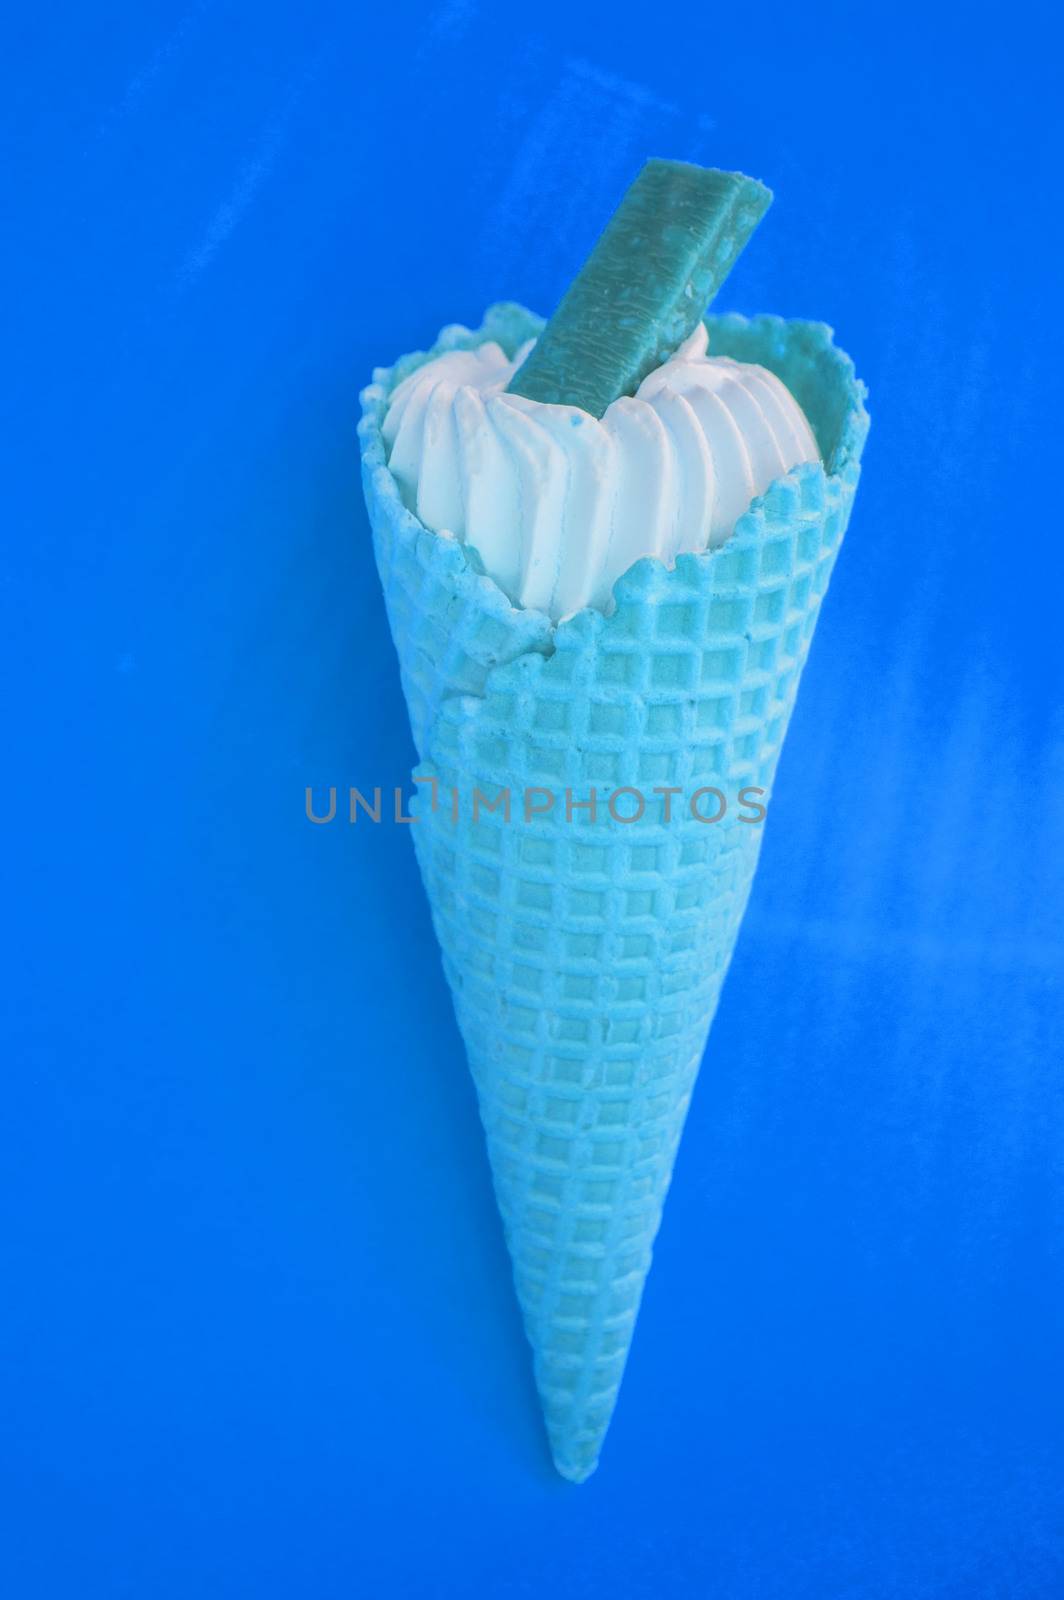 Ice cream CONE NEON COLORS pop art Flatley art, blue background by claire_lucia